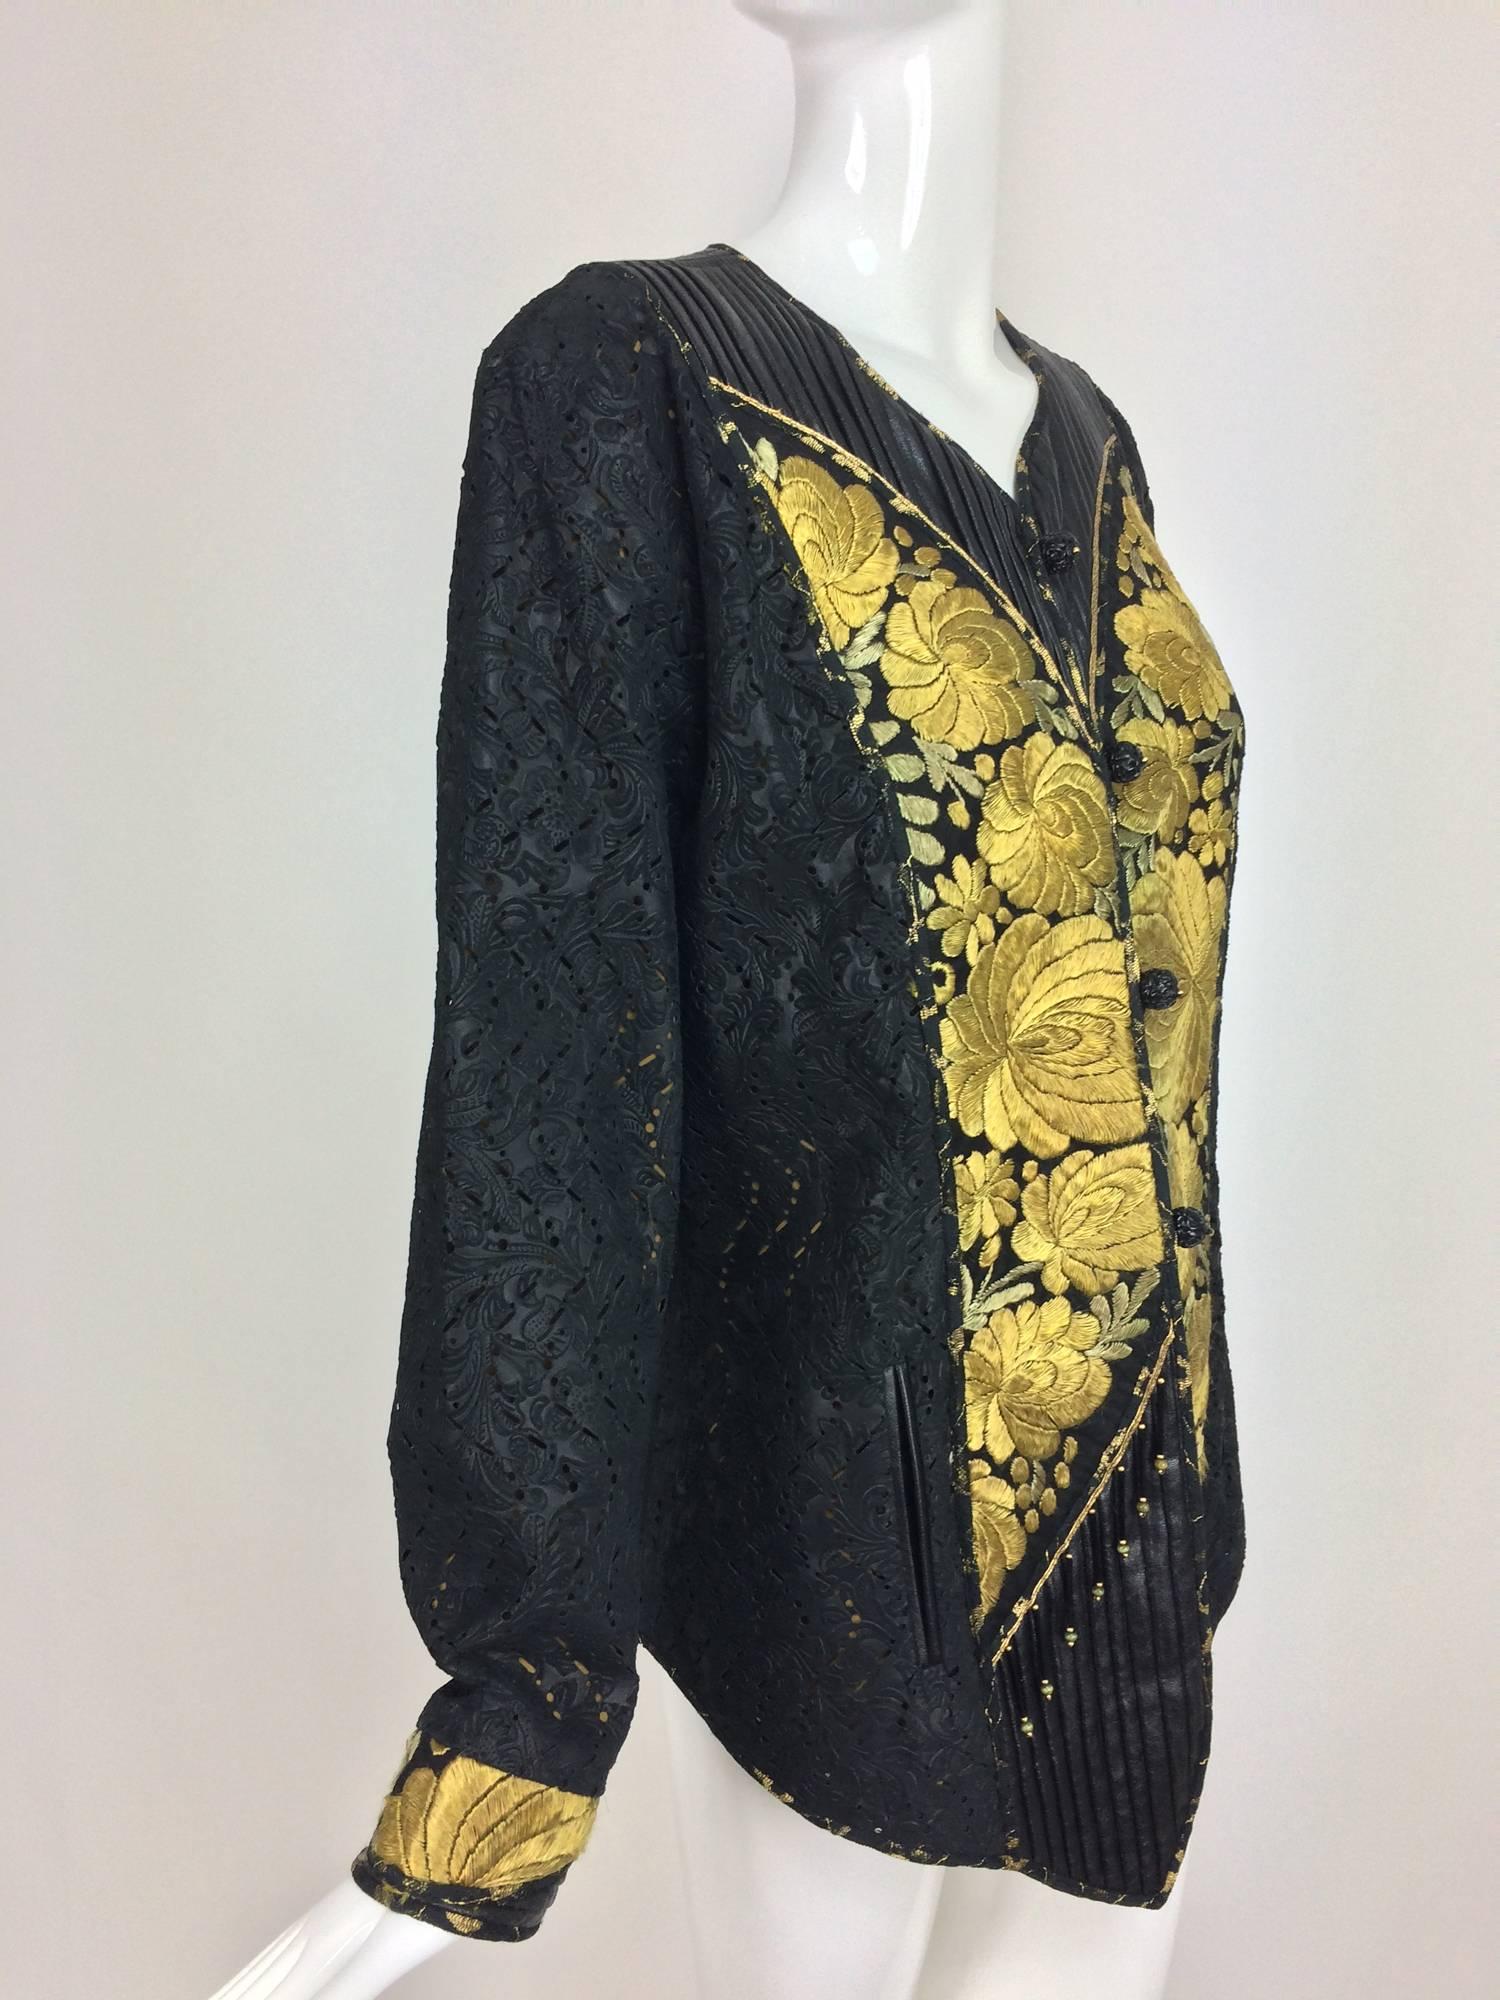 Kaneko Los Angeles, art to wear black laser cut leather jacket with panels of embroidered antique textile in gold...Beautiful design one of a kind jacket with lots of unusual details...The laser cut leather is amazing...Bands of inset panels of hand